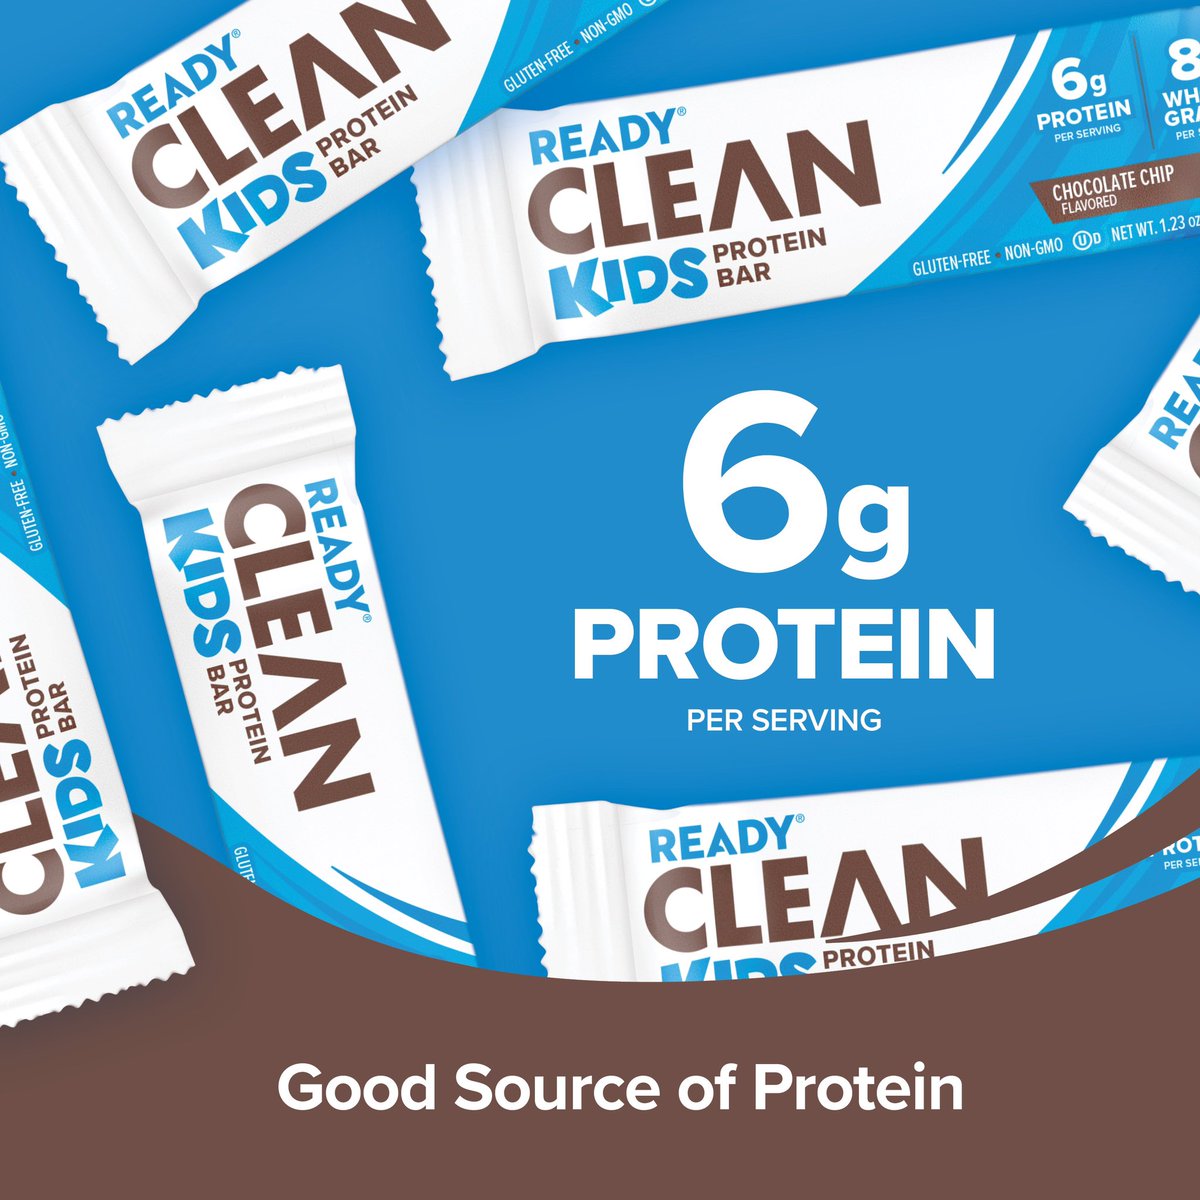 Have you tried the Chocolate Chip Ready® Clean Kids Whole Grain Protein Bars? ➡️ 6g of protein ➡️ 8g of whole grains ➡️ 20% less sugar vs. other leading kids bars Perfect for breakfast, quick energy or snacking on-the-go. Available at @Walmart + Walmart.com 📍